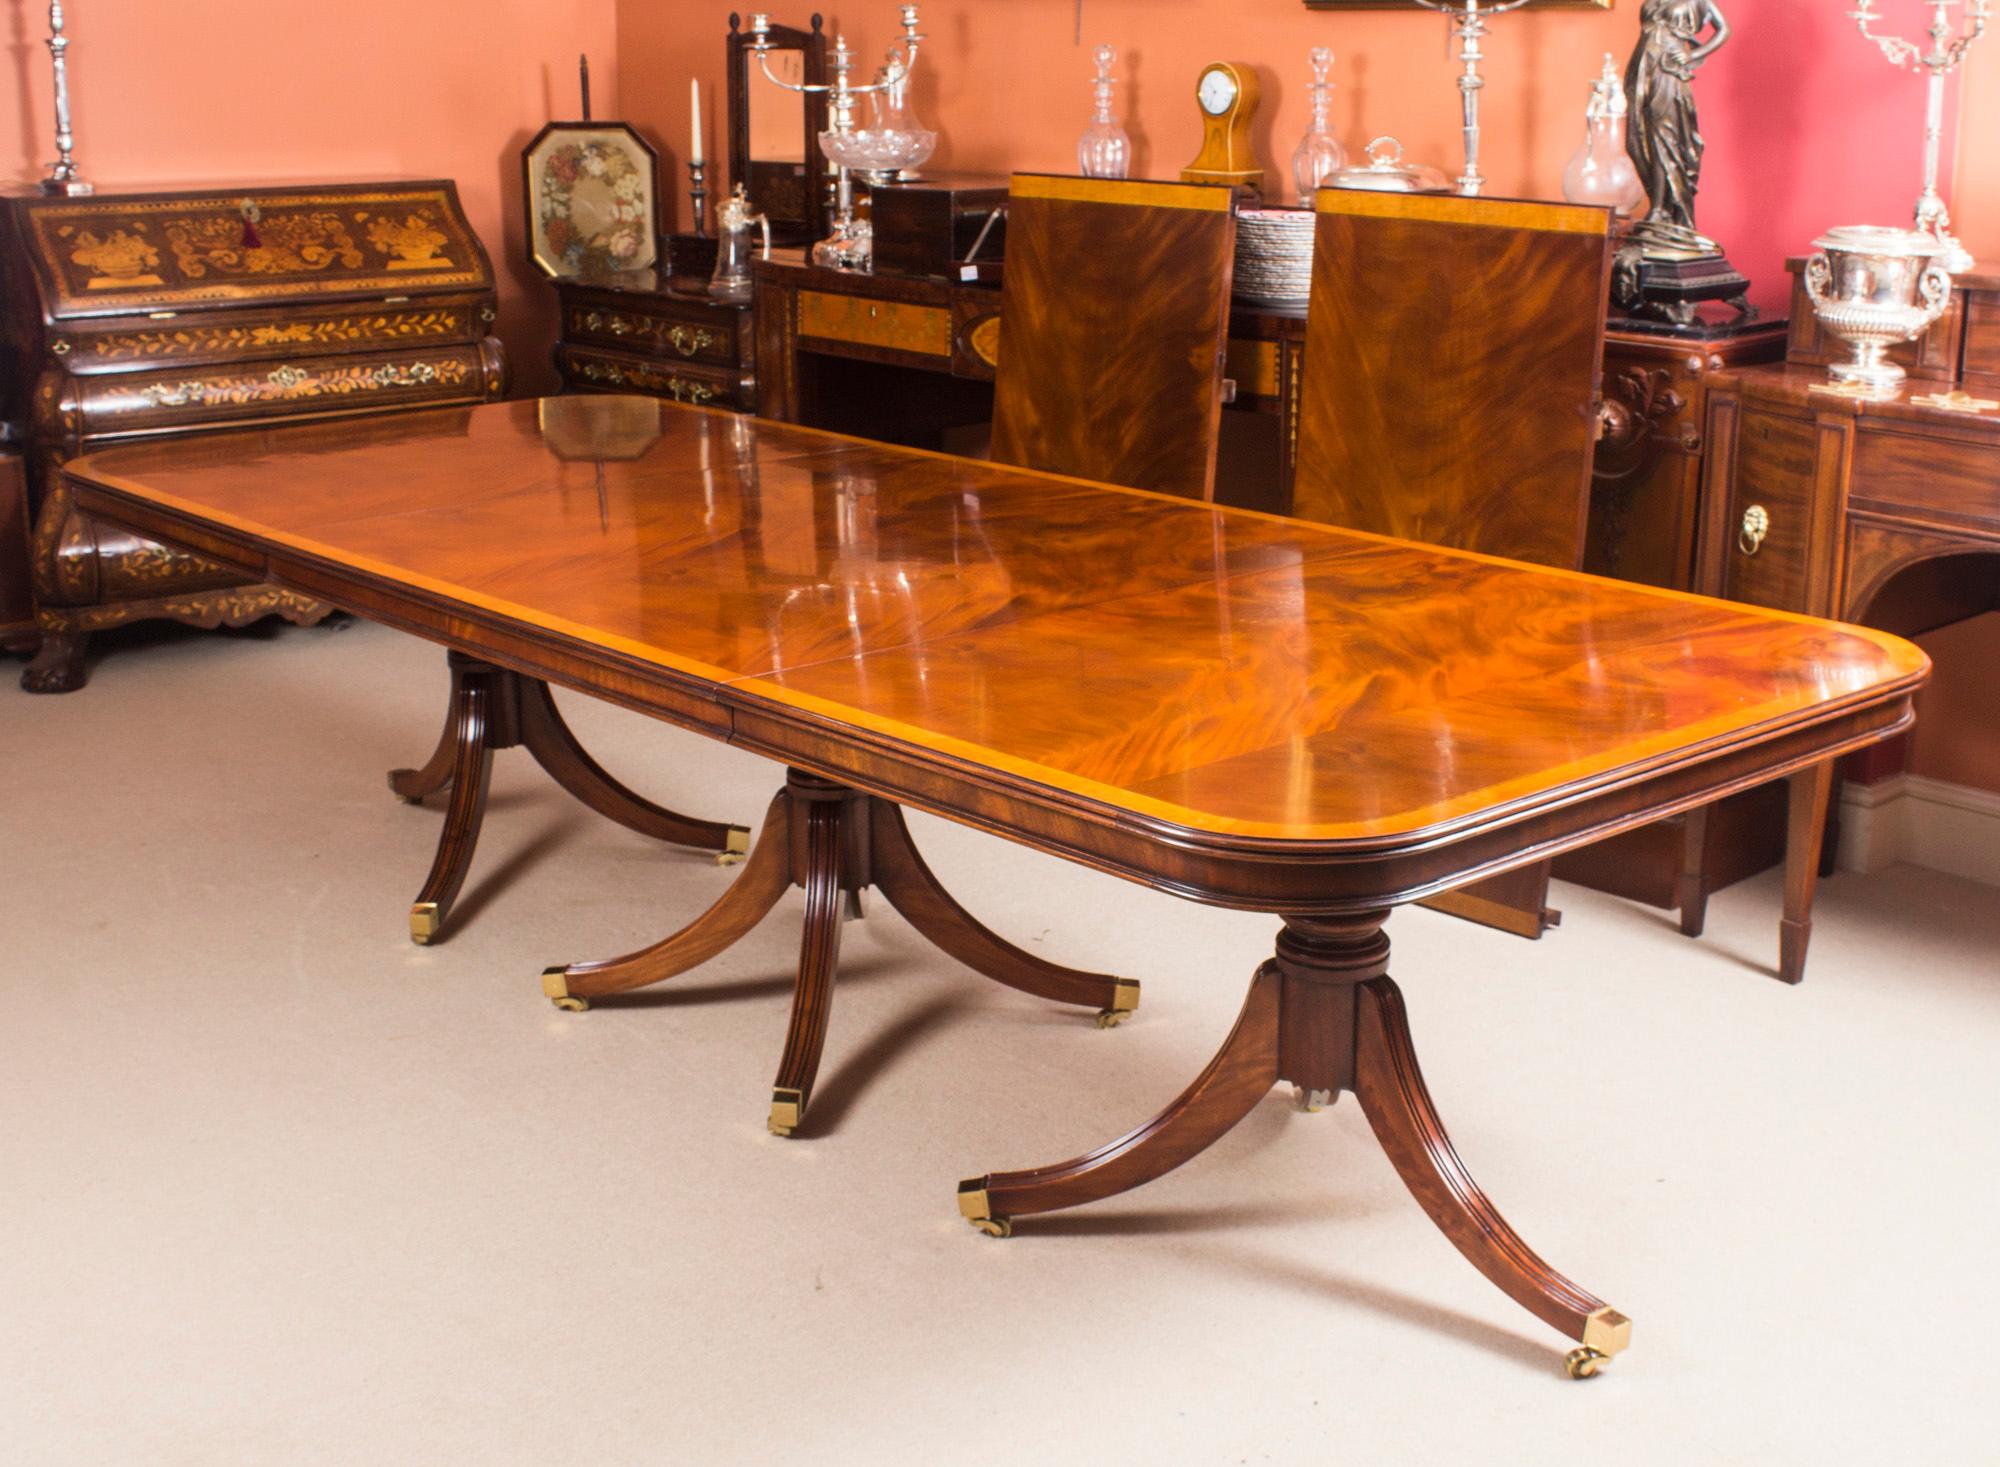 Vintage 14 ft Three Pillar Mahogany Dining Table and 16 Chairs 20th Century For Sale 5